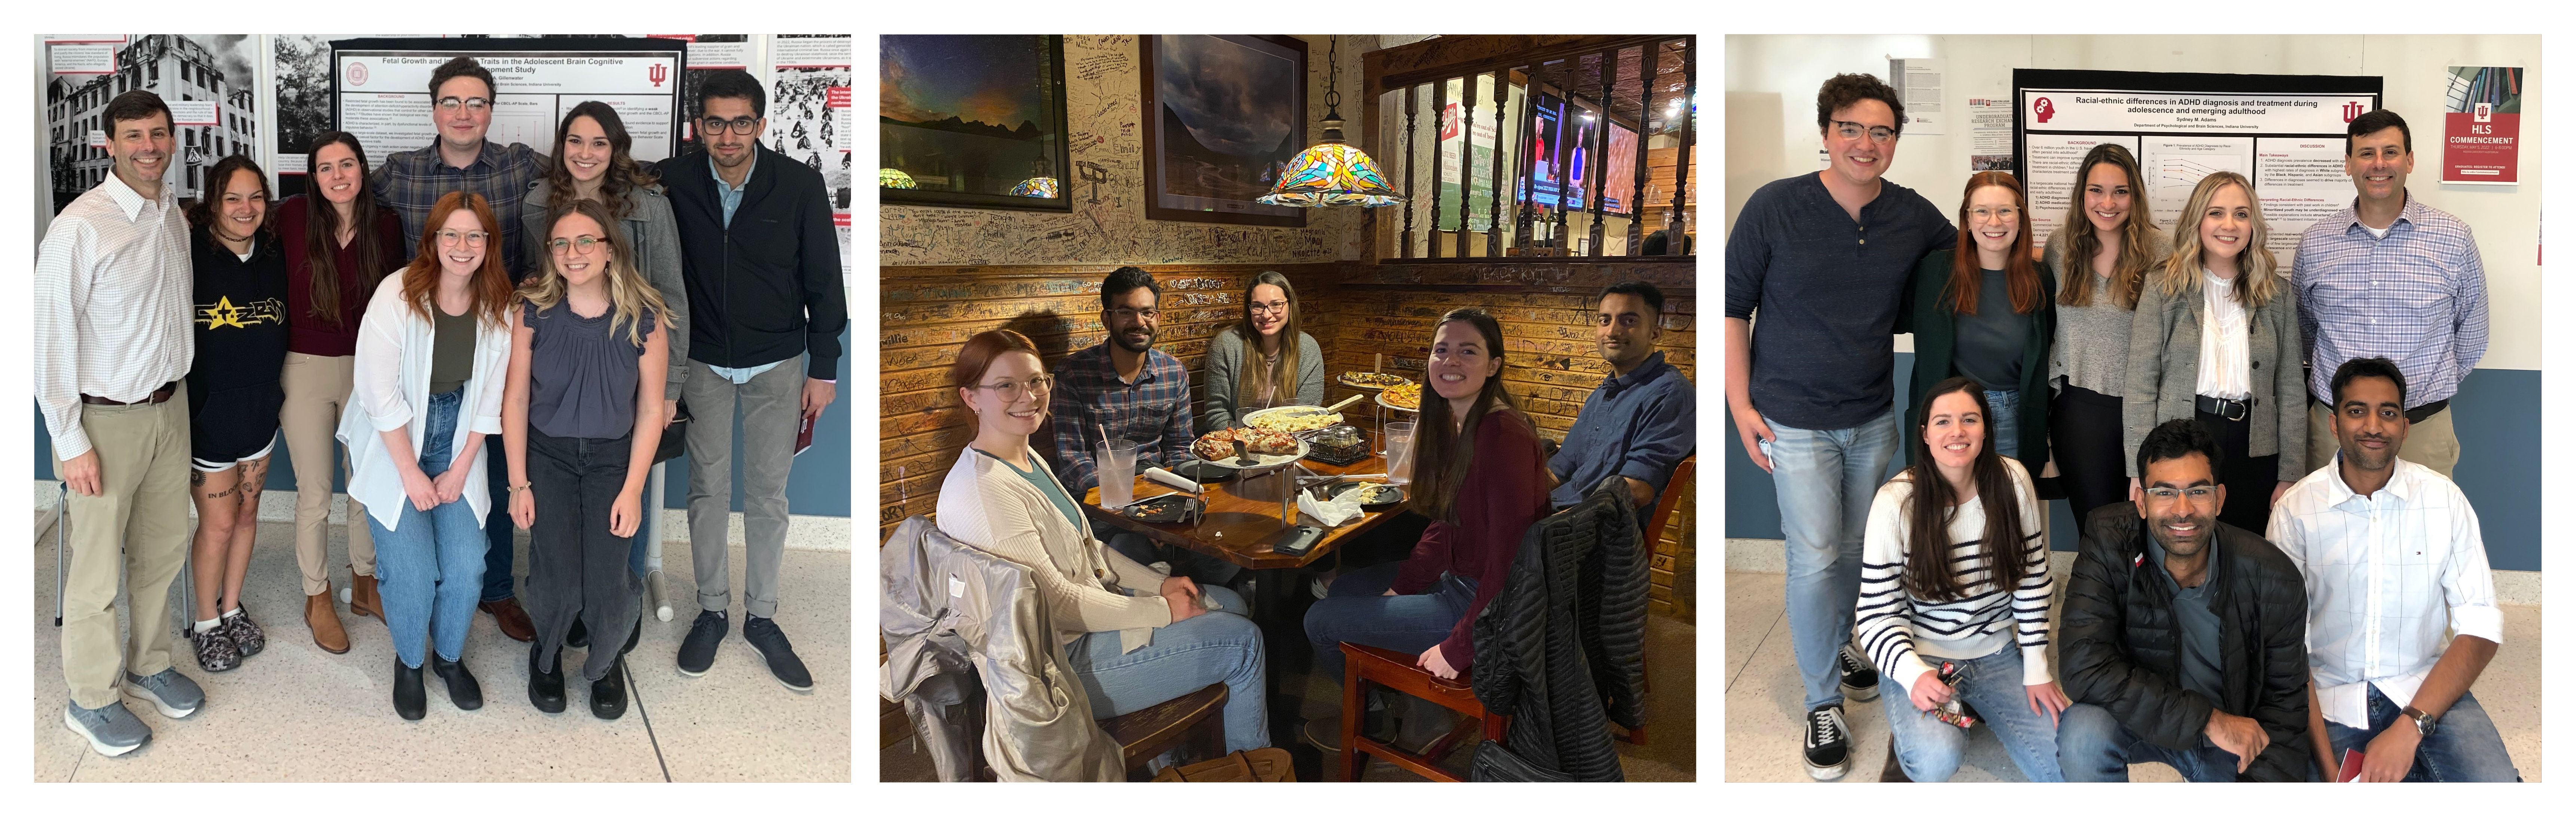 A banner with three photos. Two photos show students and Dr. D'Onofrio
										smiling, standing in front of research posters. One photo shows graduate students eating pizza at a restaurant.